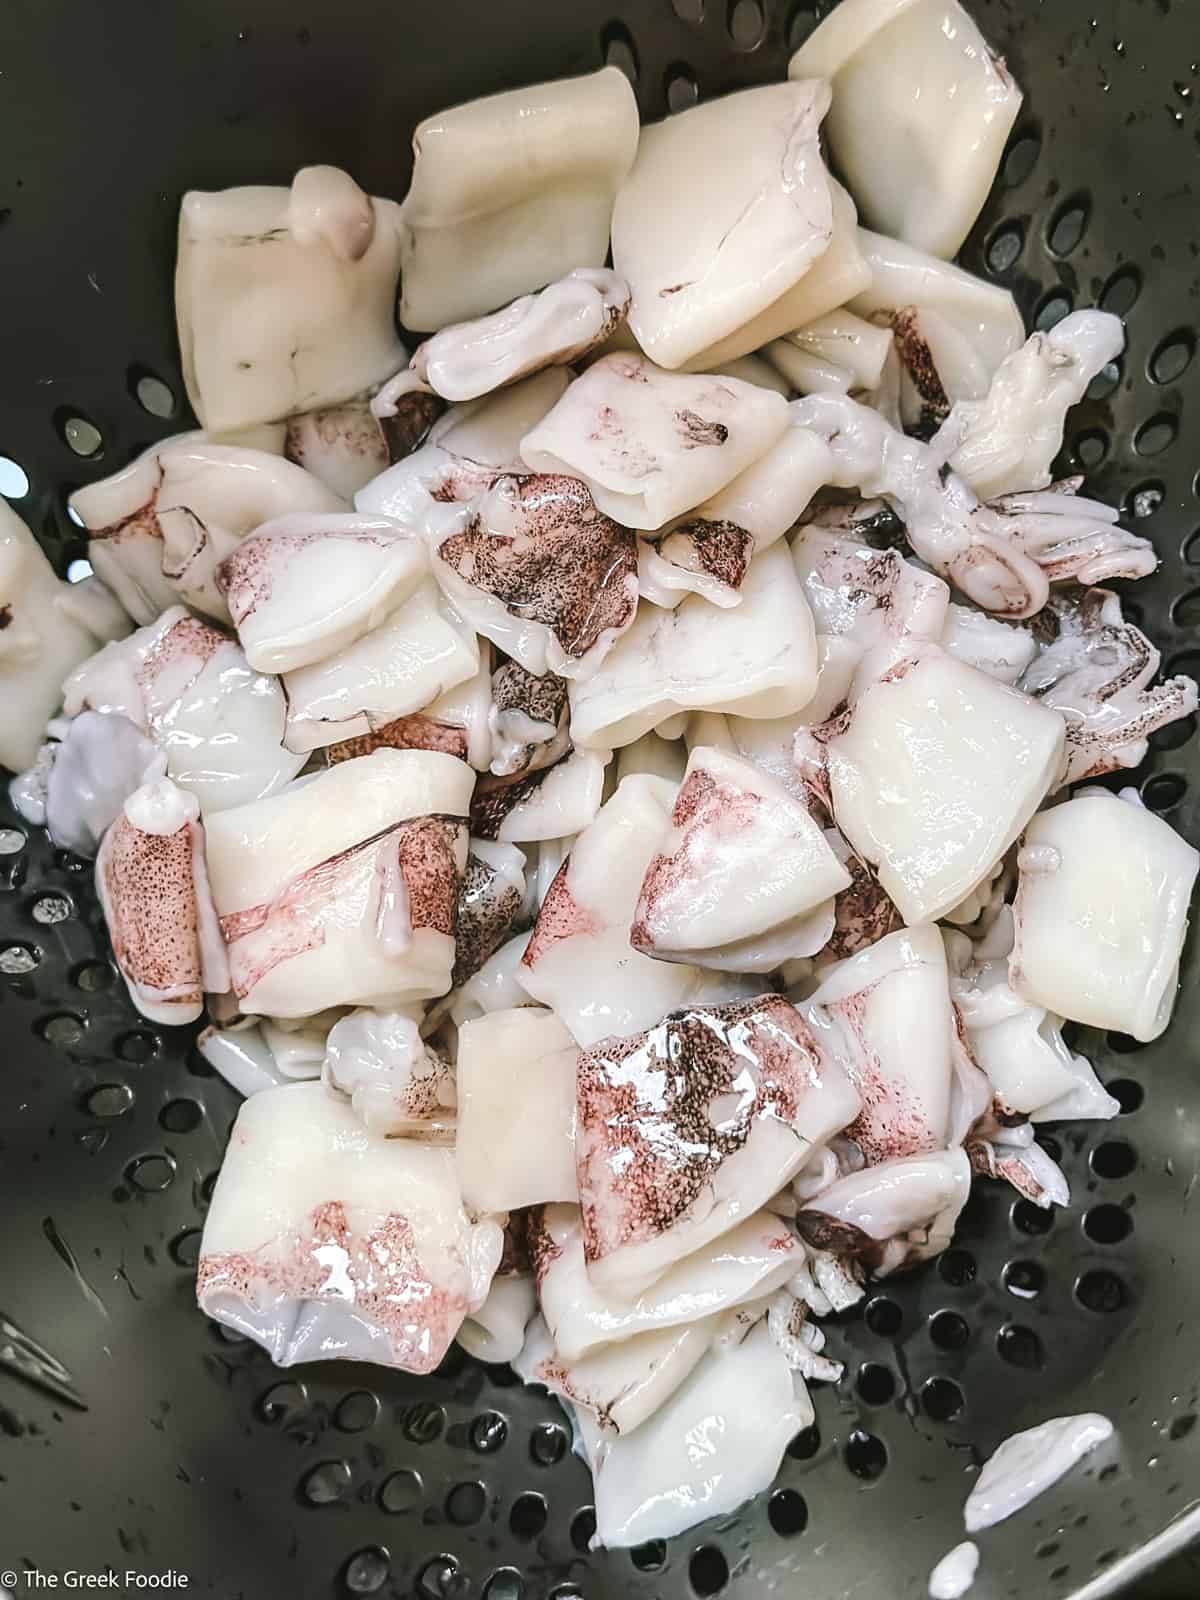 Cleaned squid in a collander.